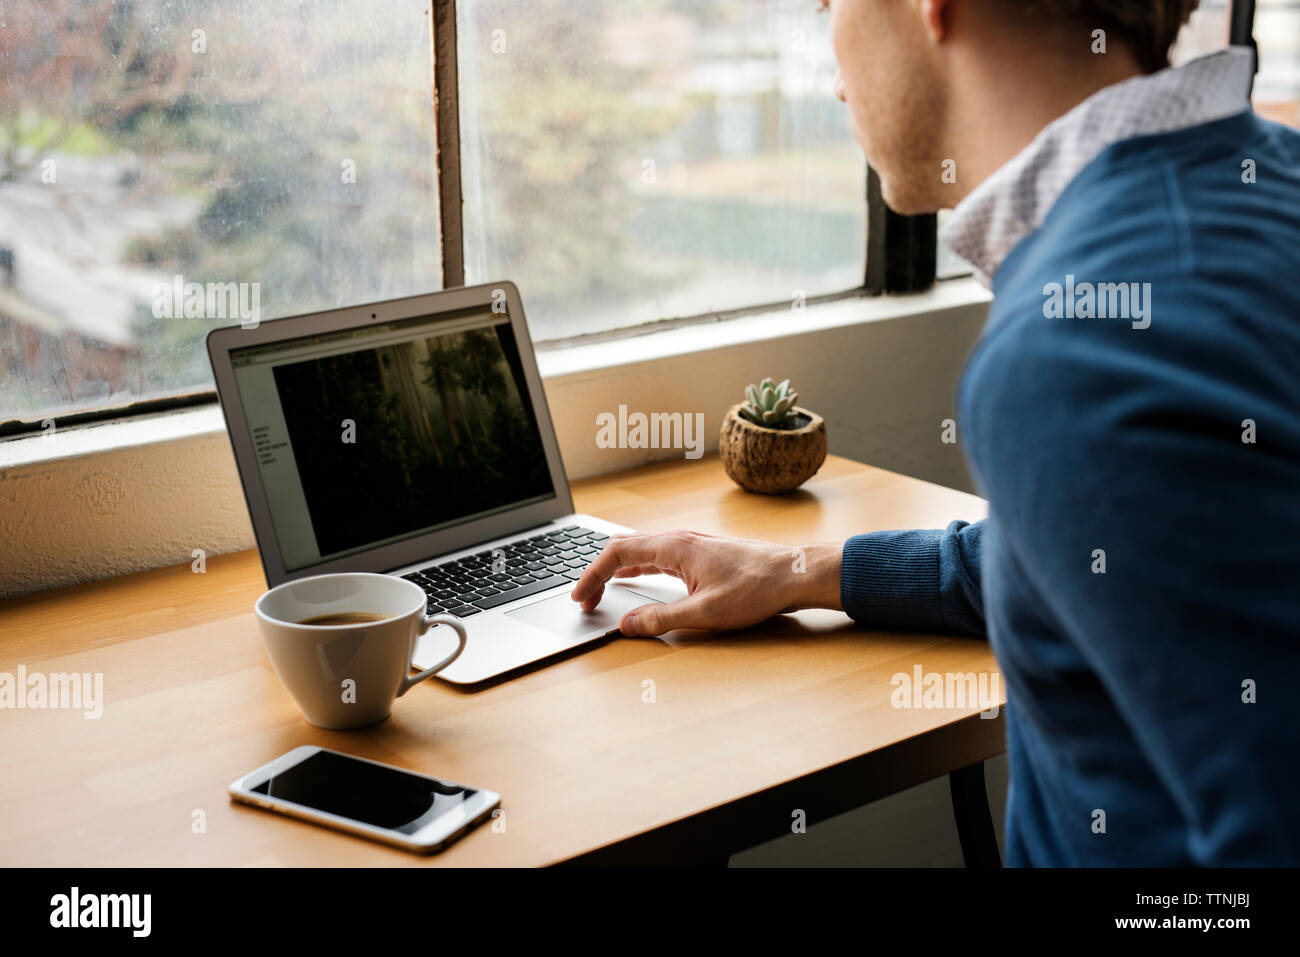 Man using laptop on table in cafe Stock Photo